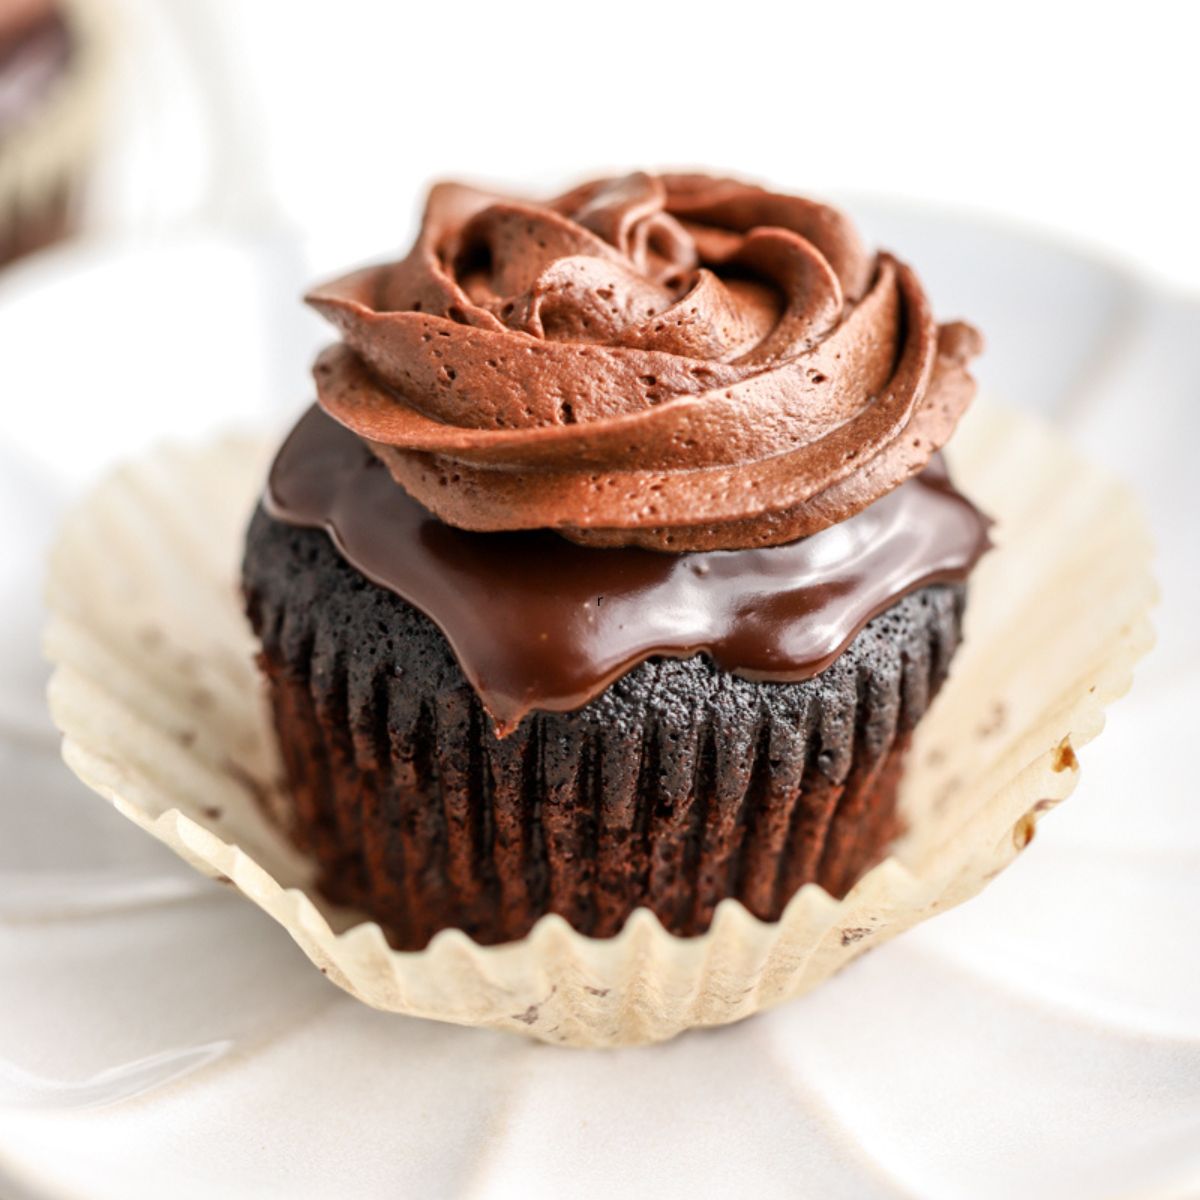 A chocolate cupcake with chocolate ganache piped on top.